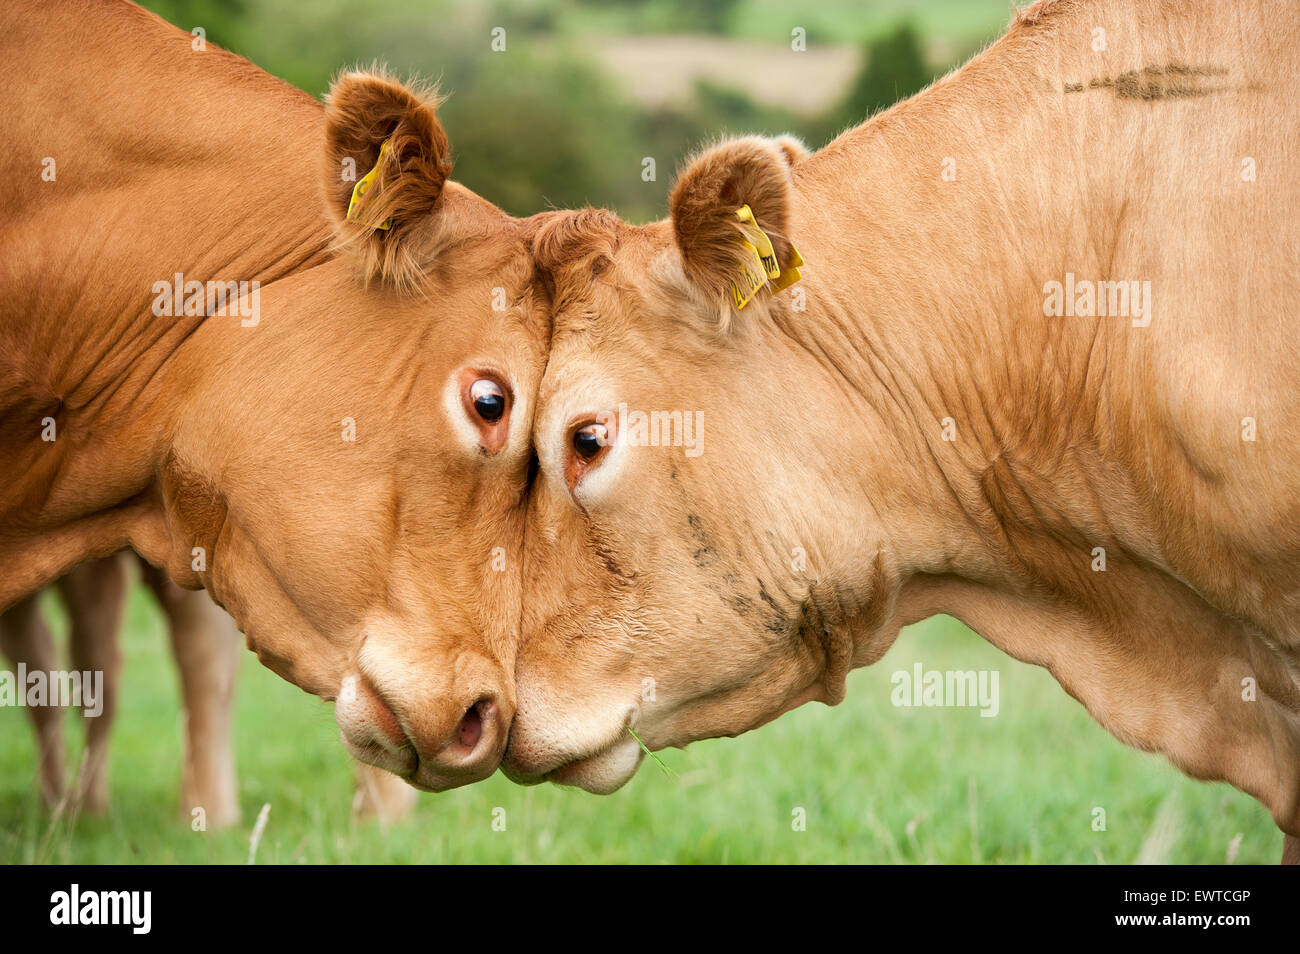 Two limousin cows fighting each other, pushing head to head. Lancashire, UK. Stock Photo